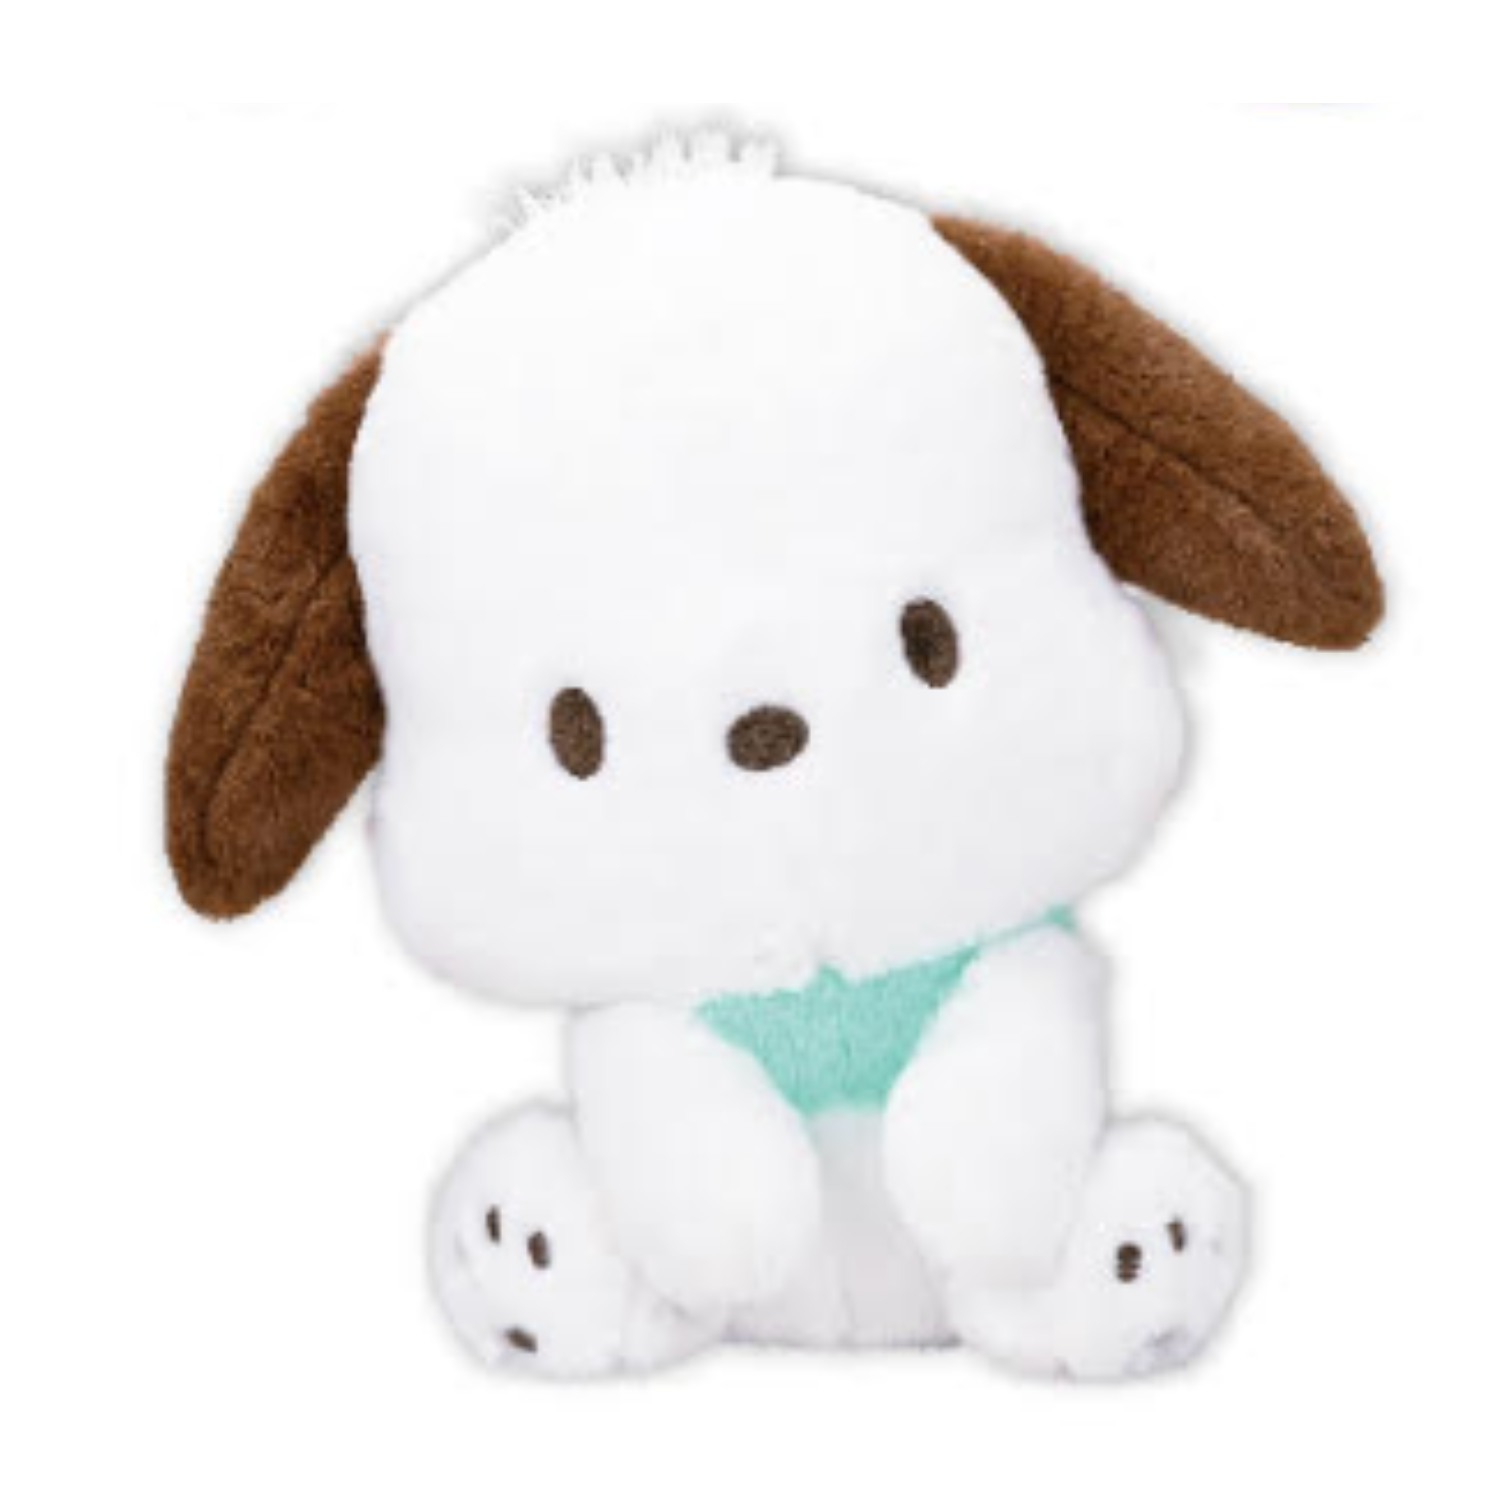 A large Pochacco plush that is super fluffy. He's wearing a mint colored bandana and his head is cocked slightly.